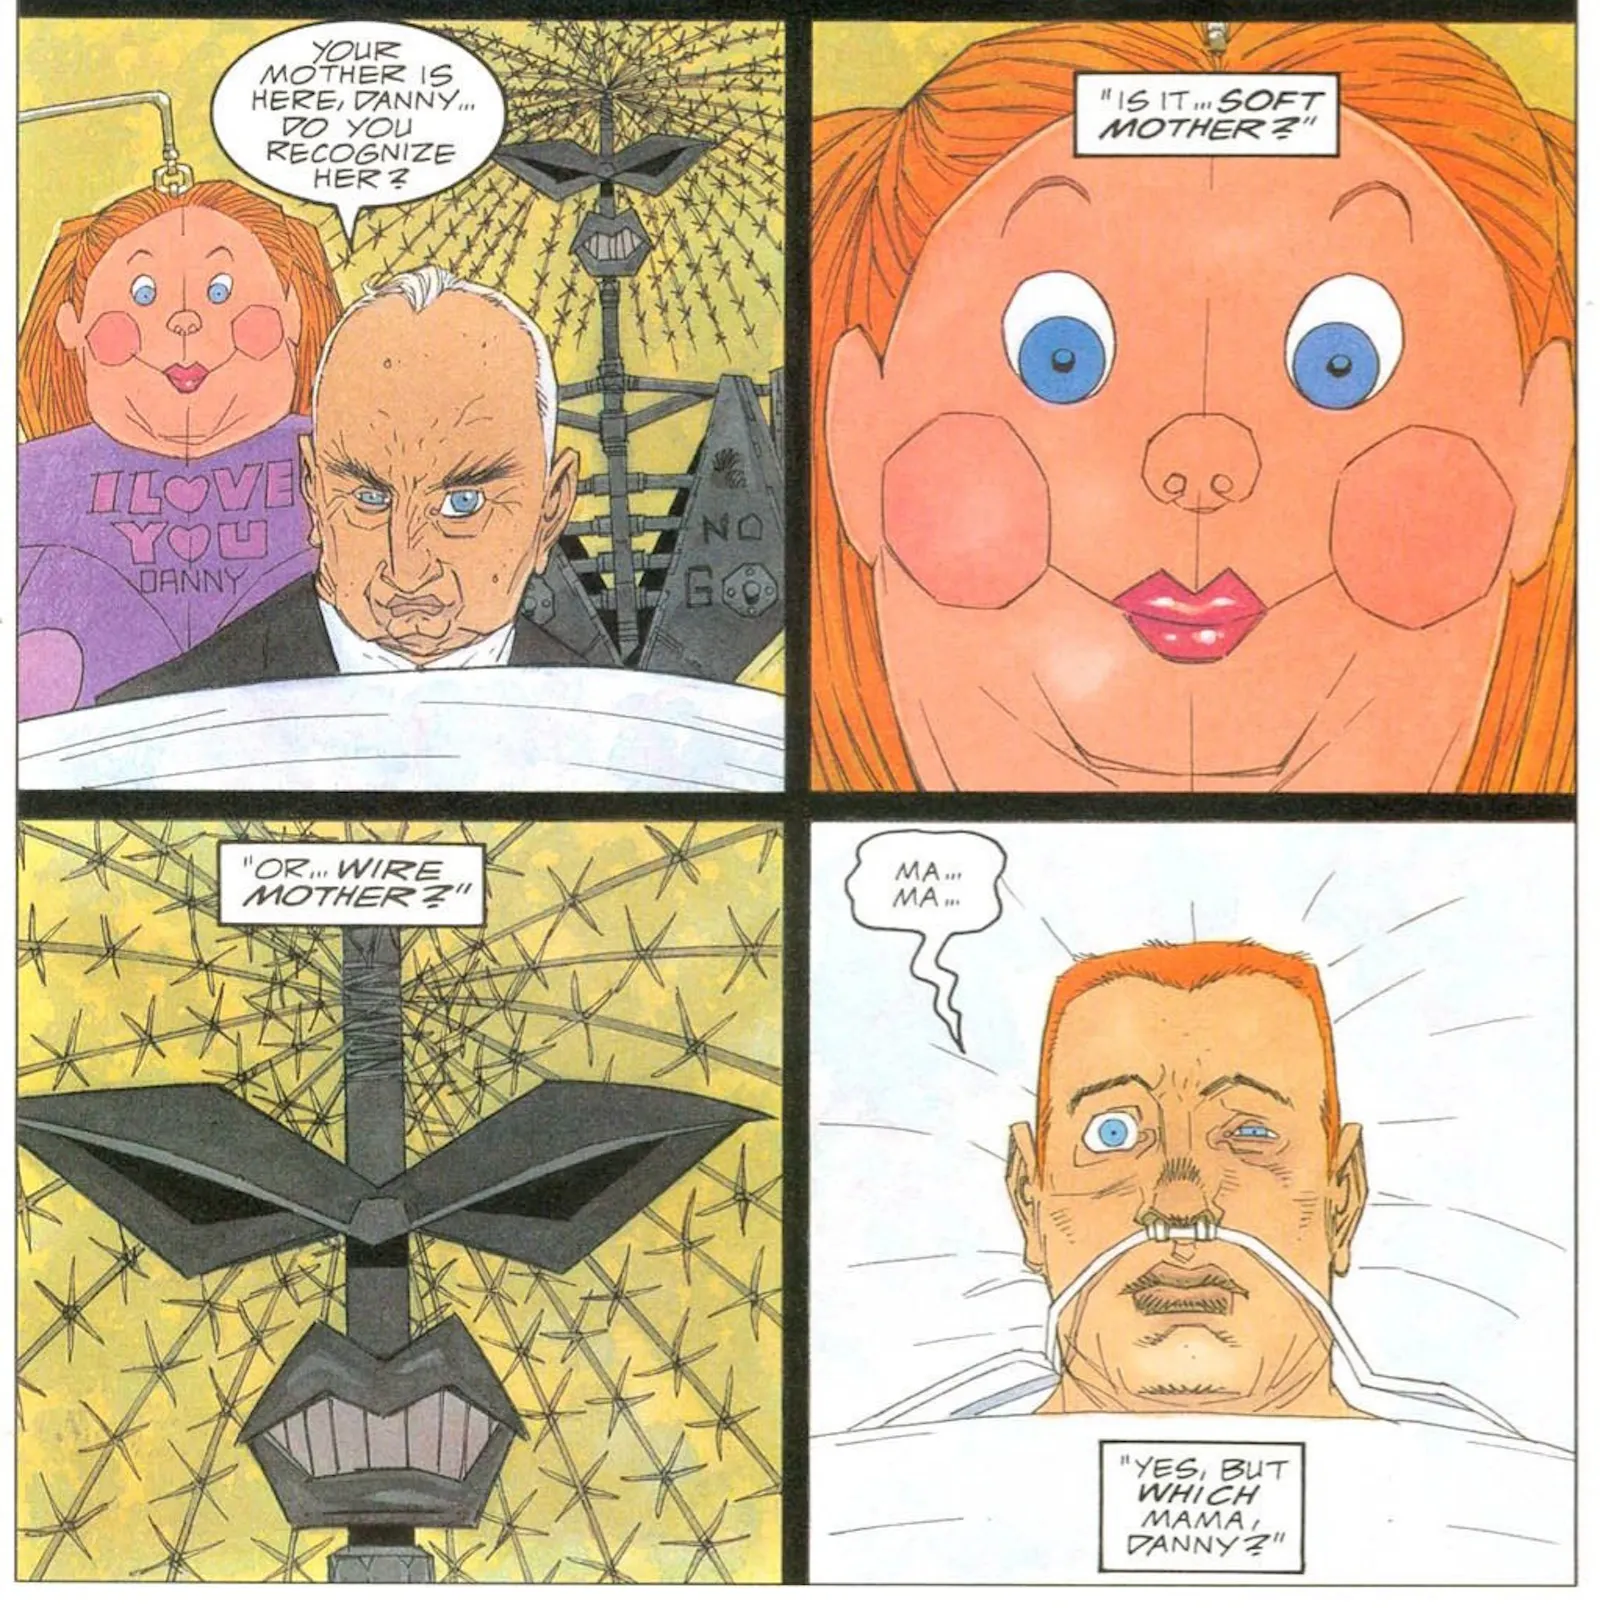 A capture of a few comics panels with a character presented with the choice between soft mother, a cuddly doll, or wire mother, a doll made of barbed wire. It ends with the text 'But which mother, Denny?